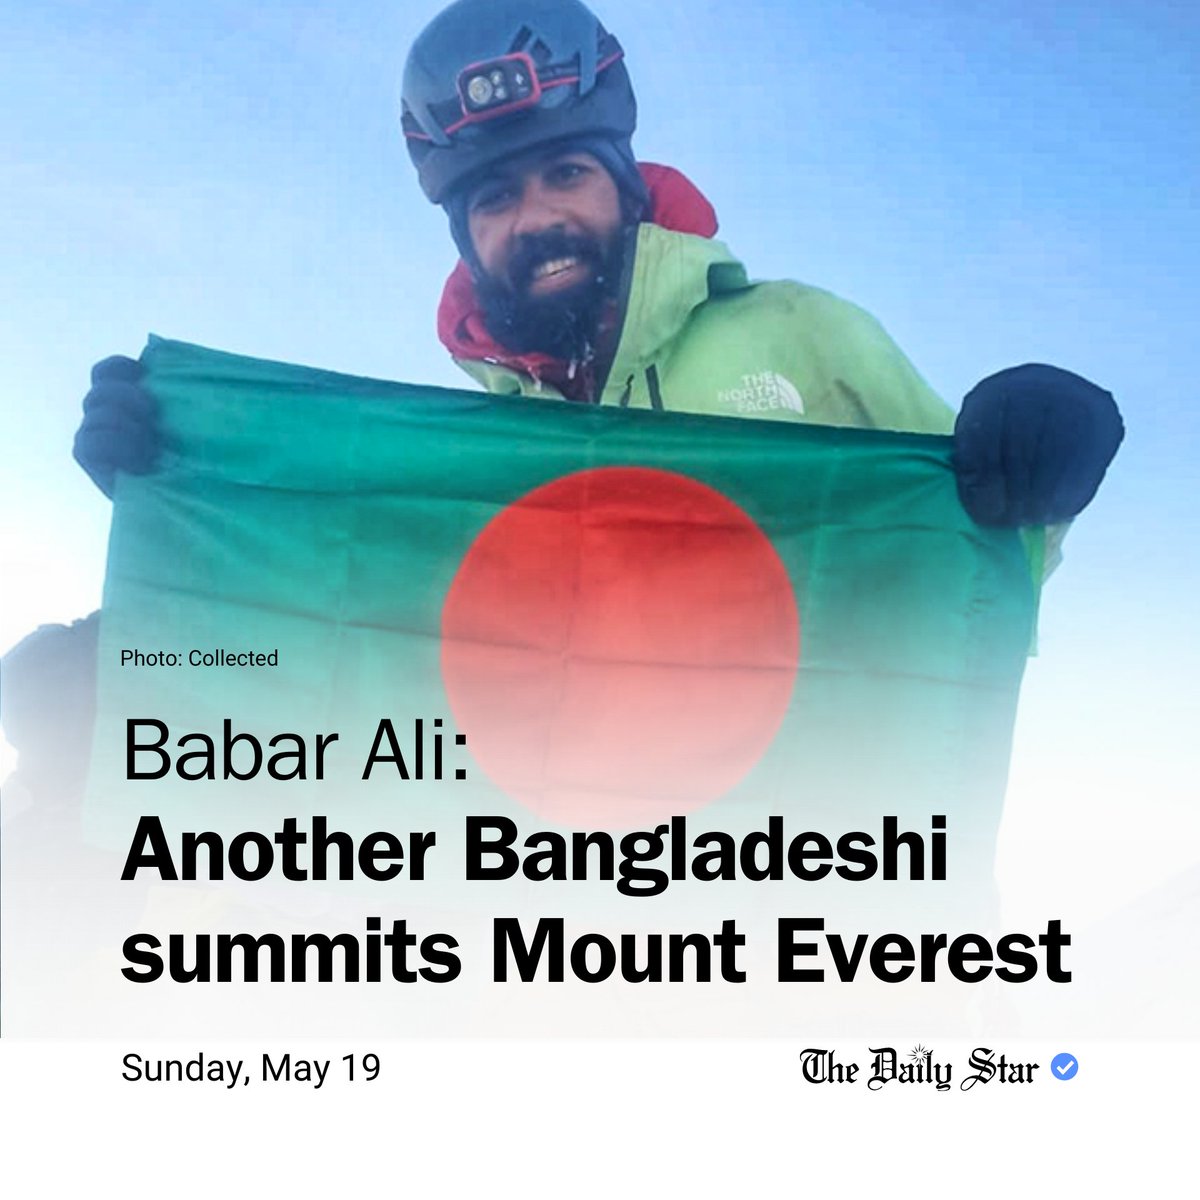 Read more: tinyurl.com/5yvjusuy

Today, at 8:30am local time (8:45am Bangladesh time), Babar Ali successfully summited Mount Everest, the highest peak in the world.

#Bangladesh #MountEverest #NewsUpdates